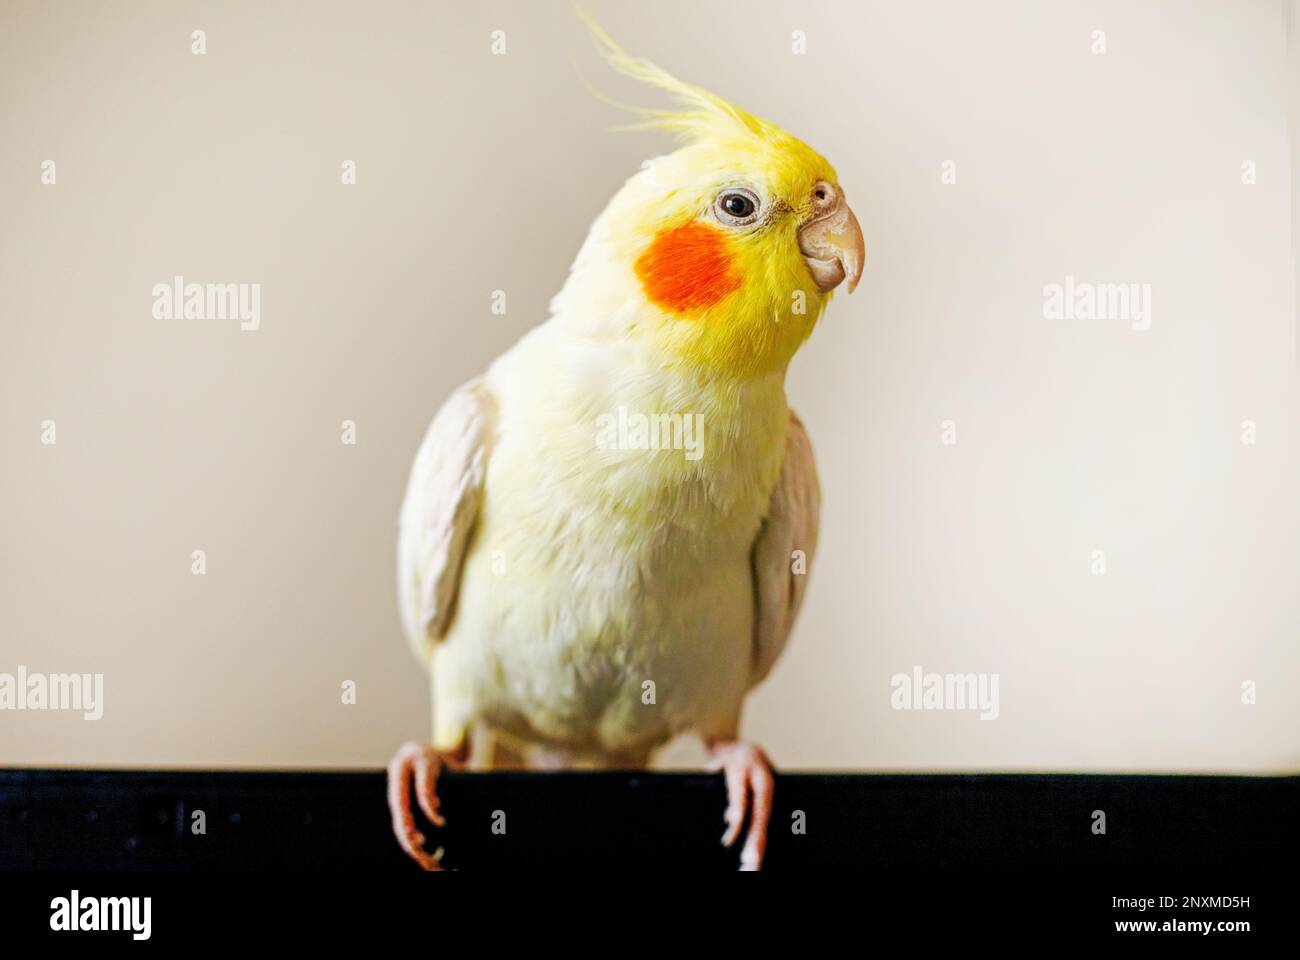 funny cockatiel parrot sits on a computer screen on a light background Stock Photo